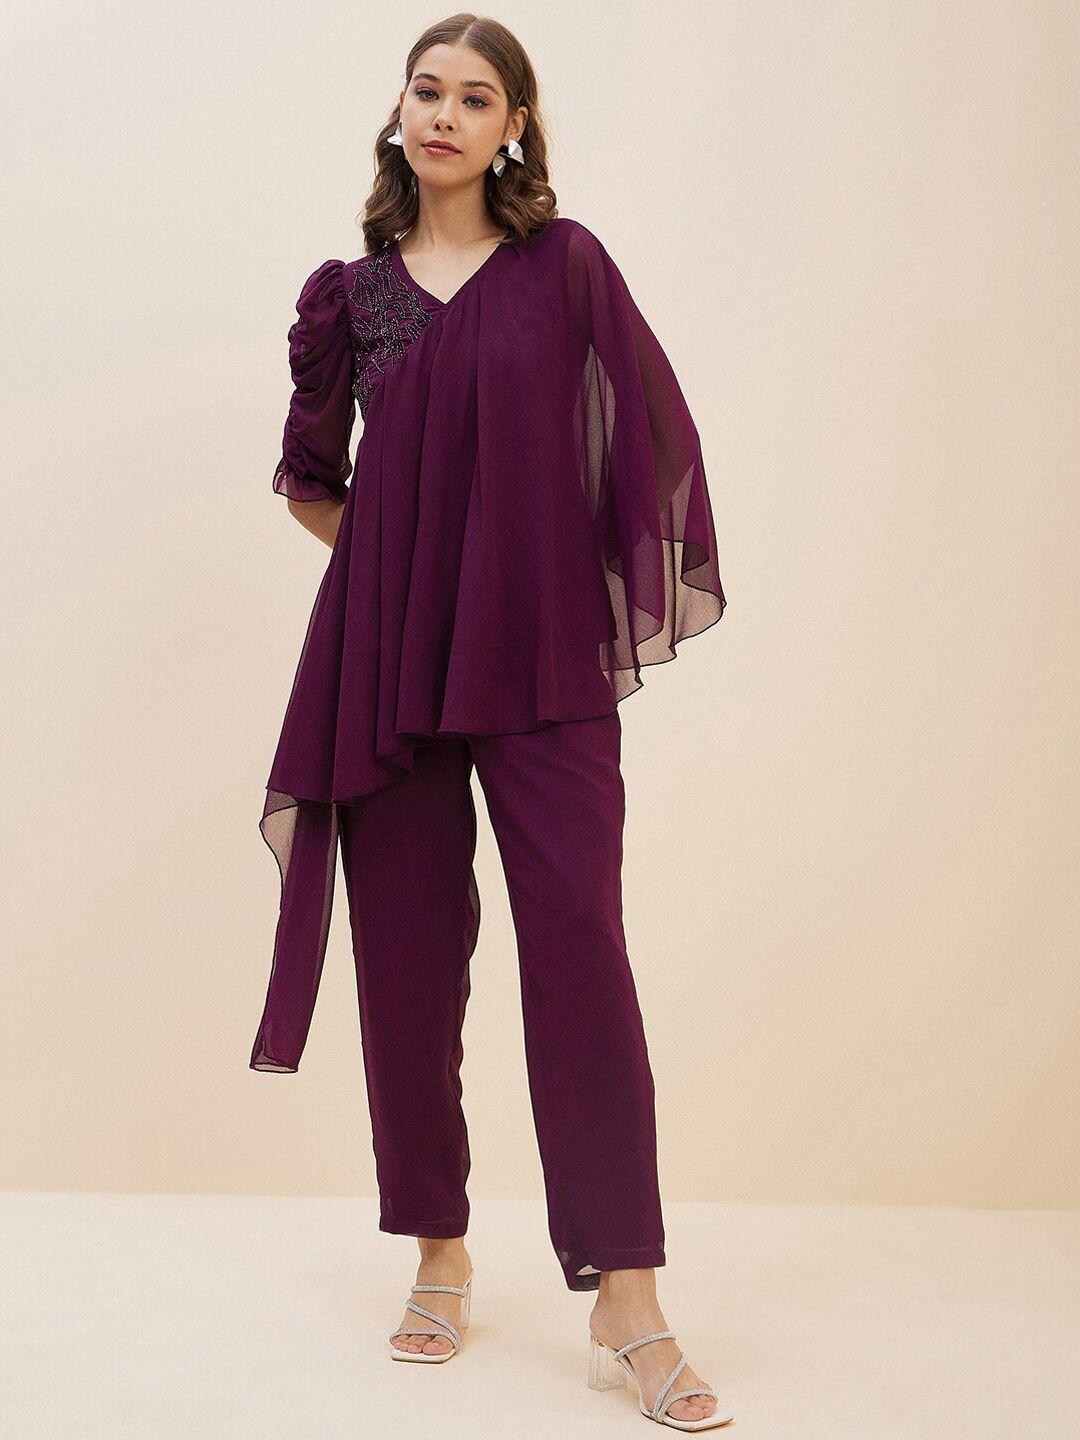 antheaa purple embellished top with trousers